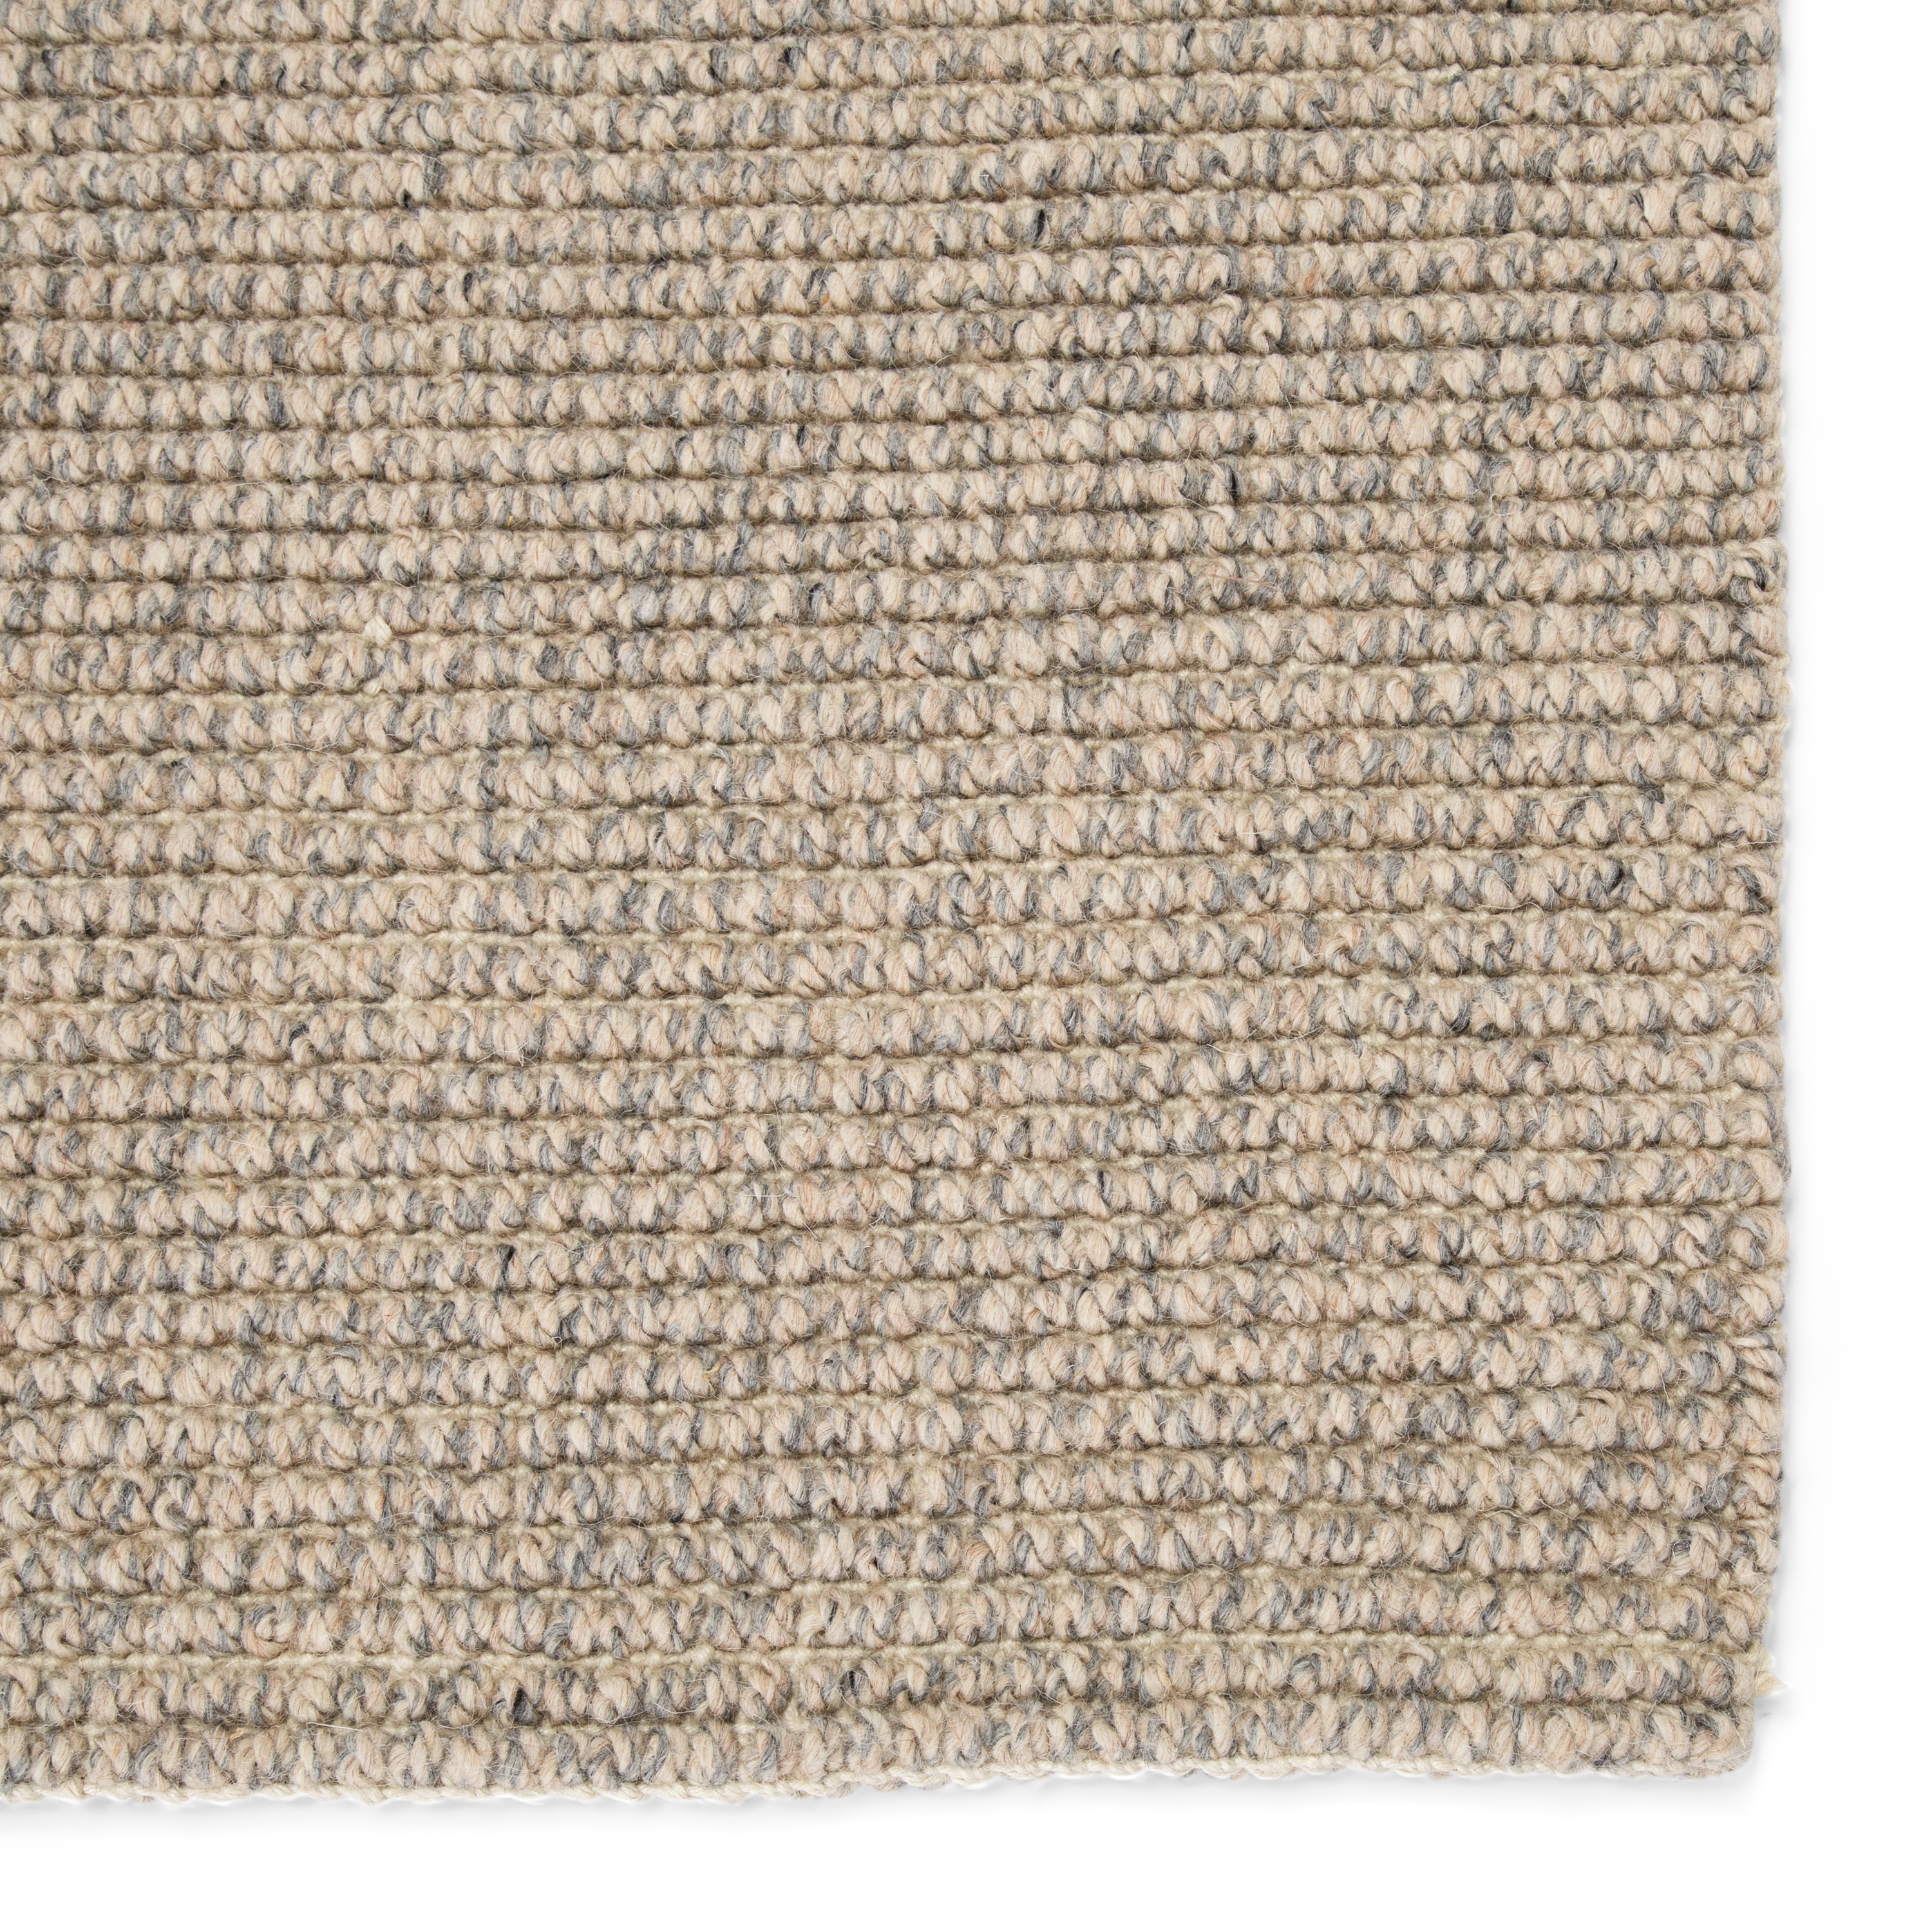 Chael Natural Solid Gray/ Beige Area Rug (10'X14') - Image 3